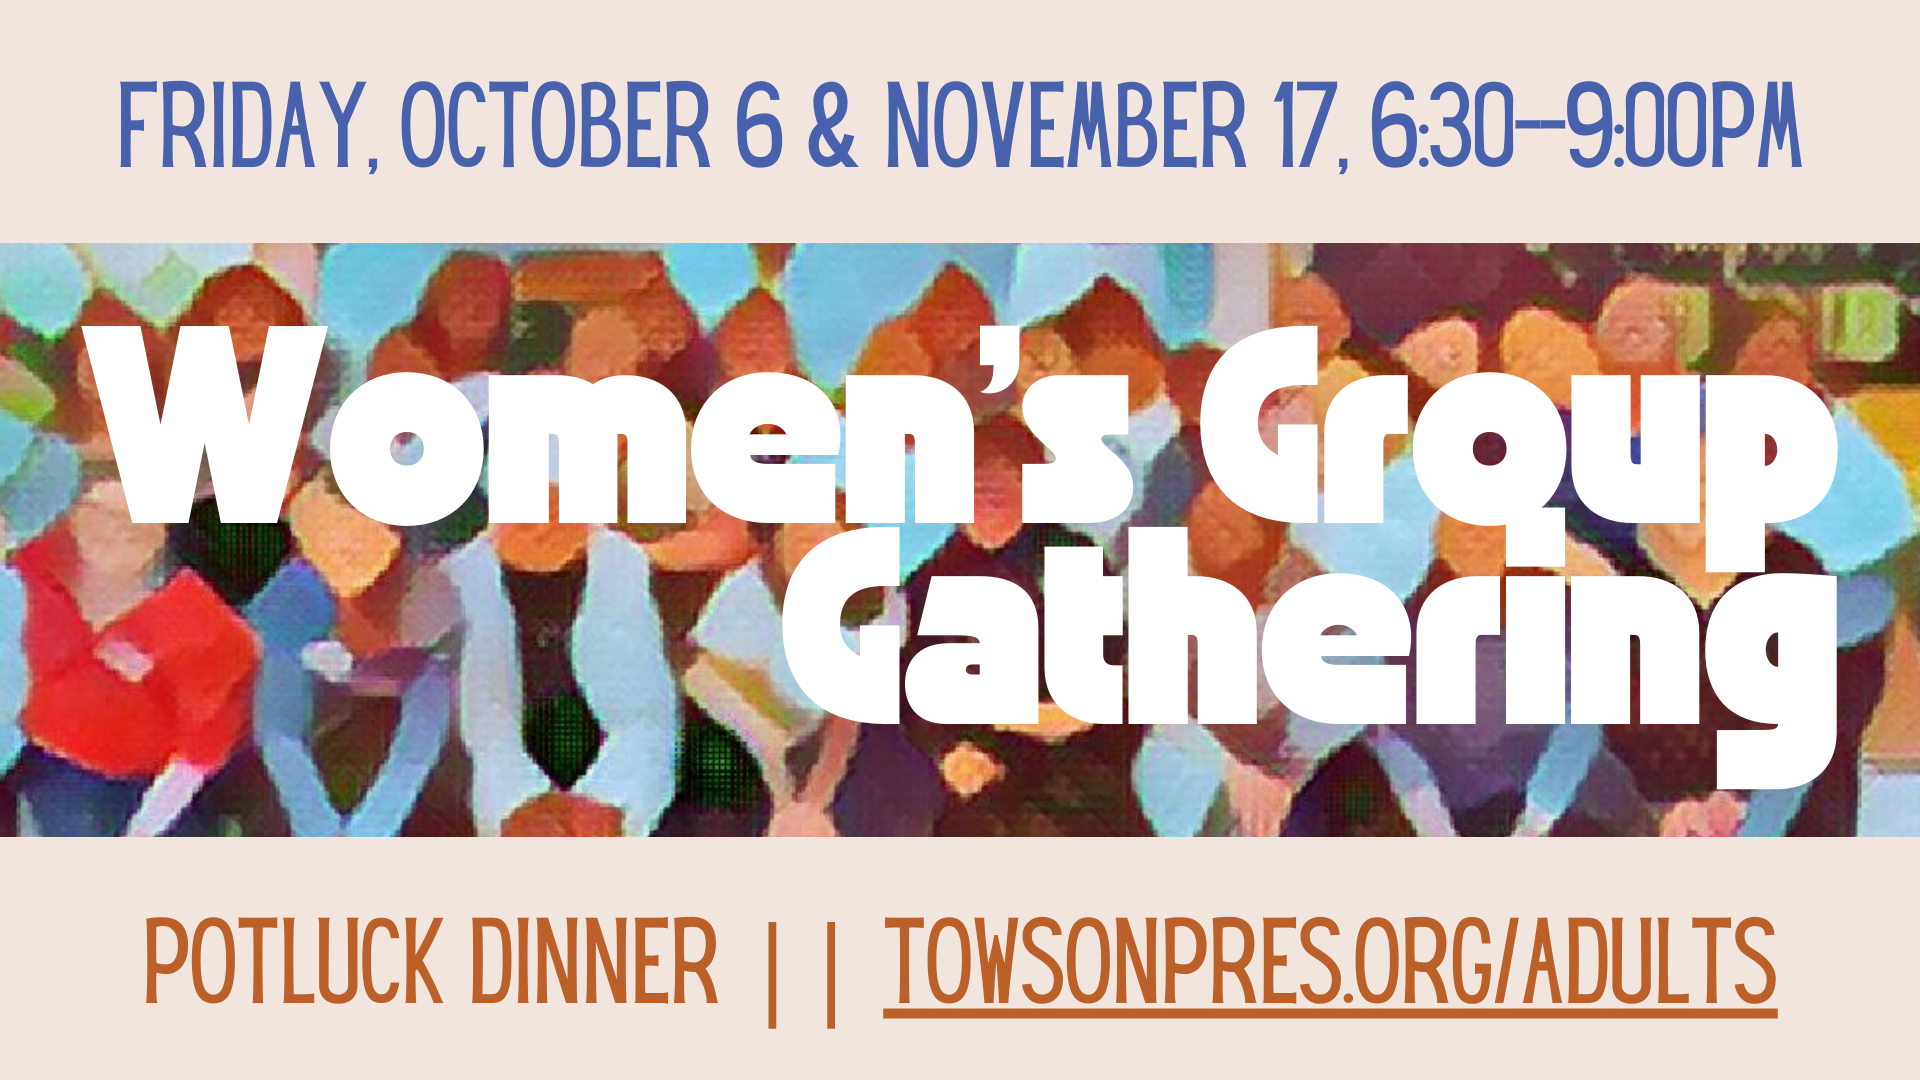 Graphic that reads: "Friday, October 6 & November 17, 6:30-9:00PM. Women's Group Gathering. Potluck Dinner | towsonpres.org/adults."